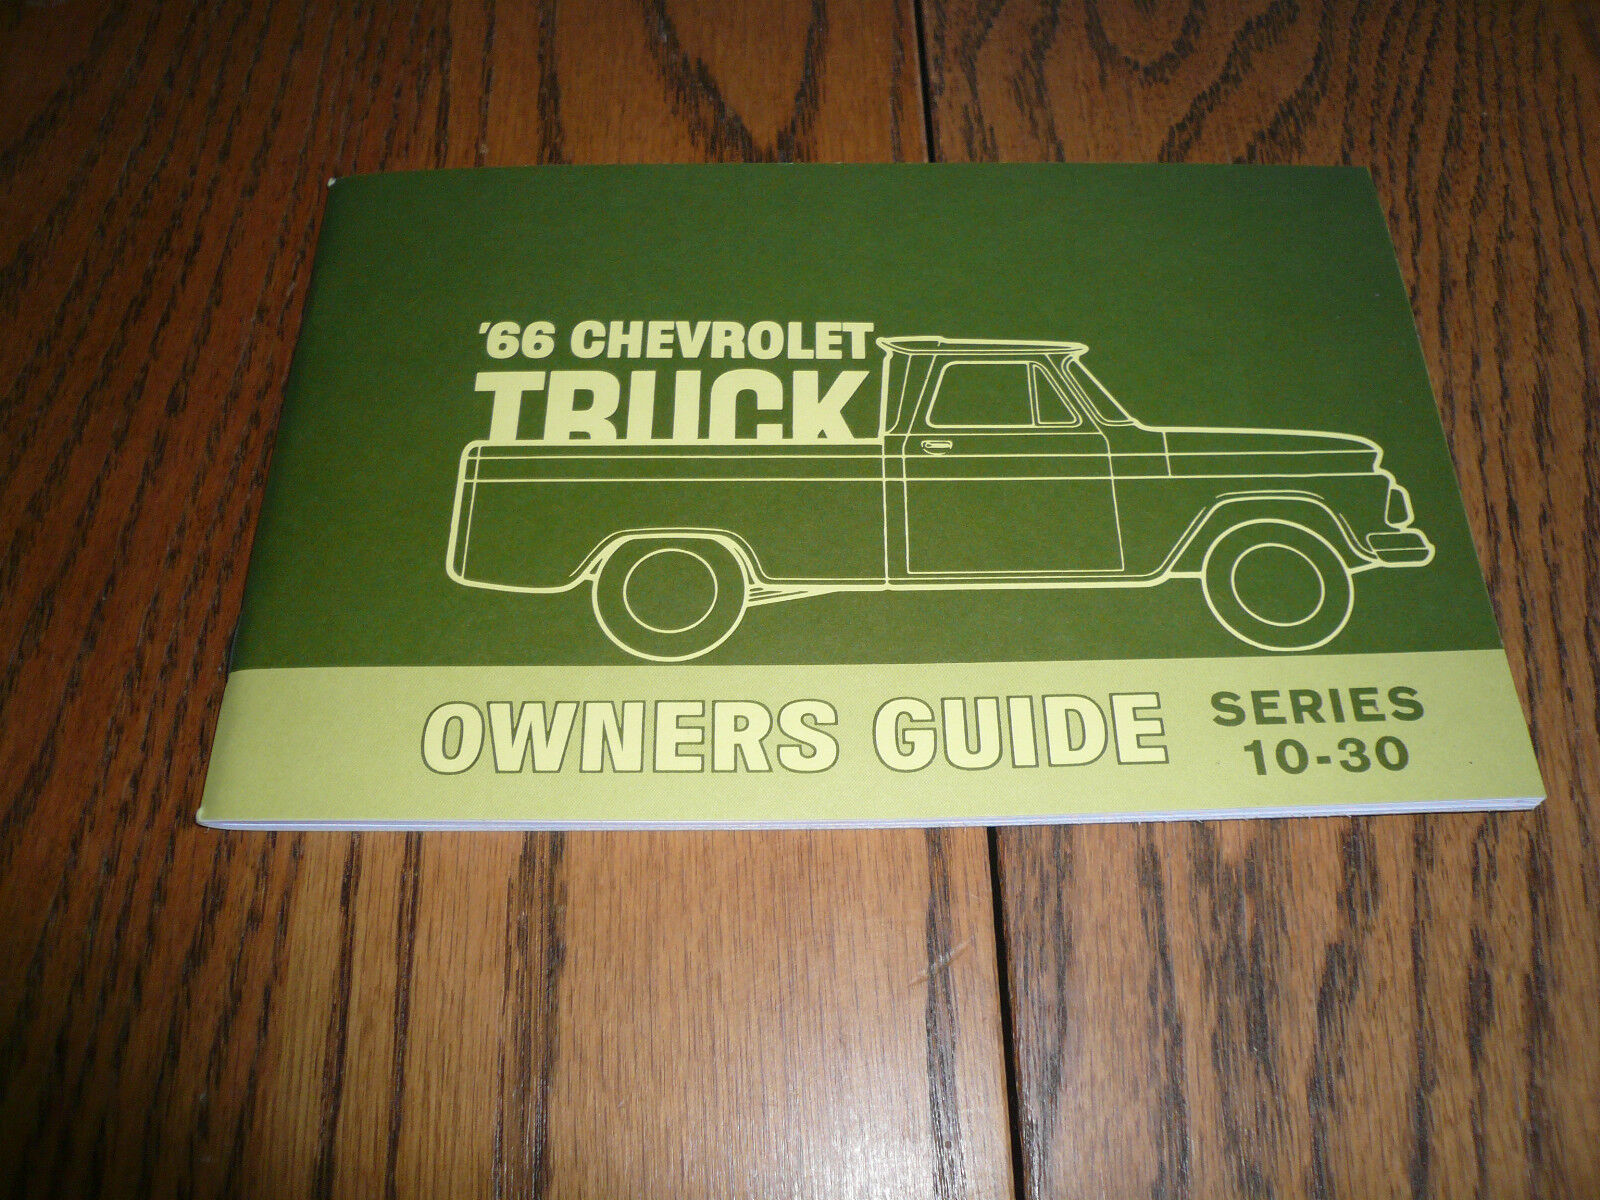 1966 Chevrolet Truck Owners Guide - Glove Box - Series 10 - 30